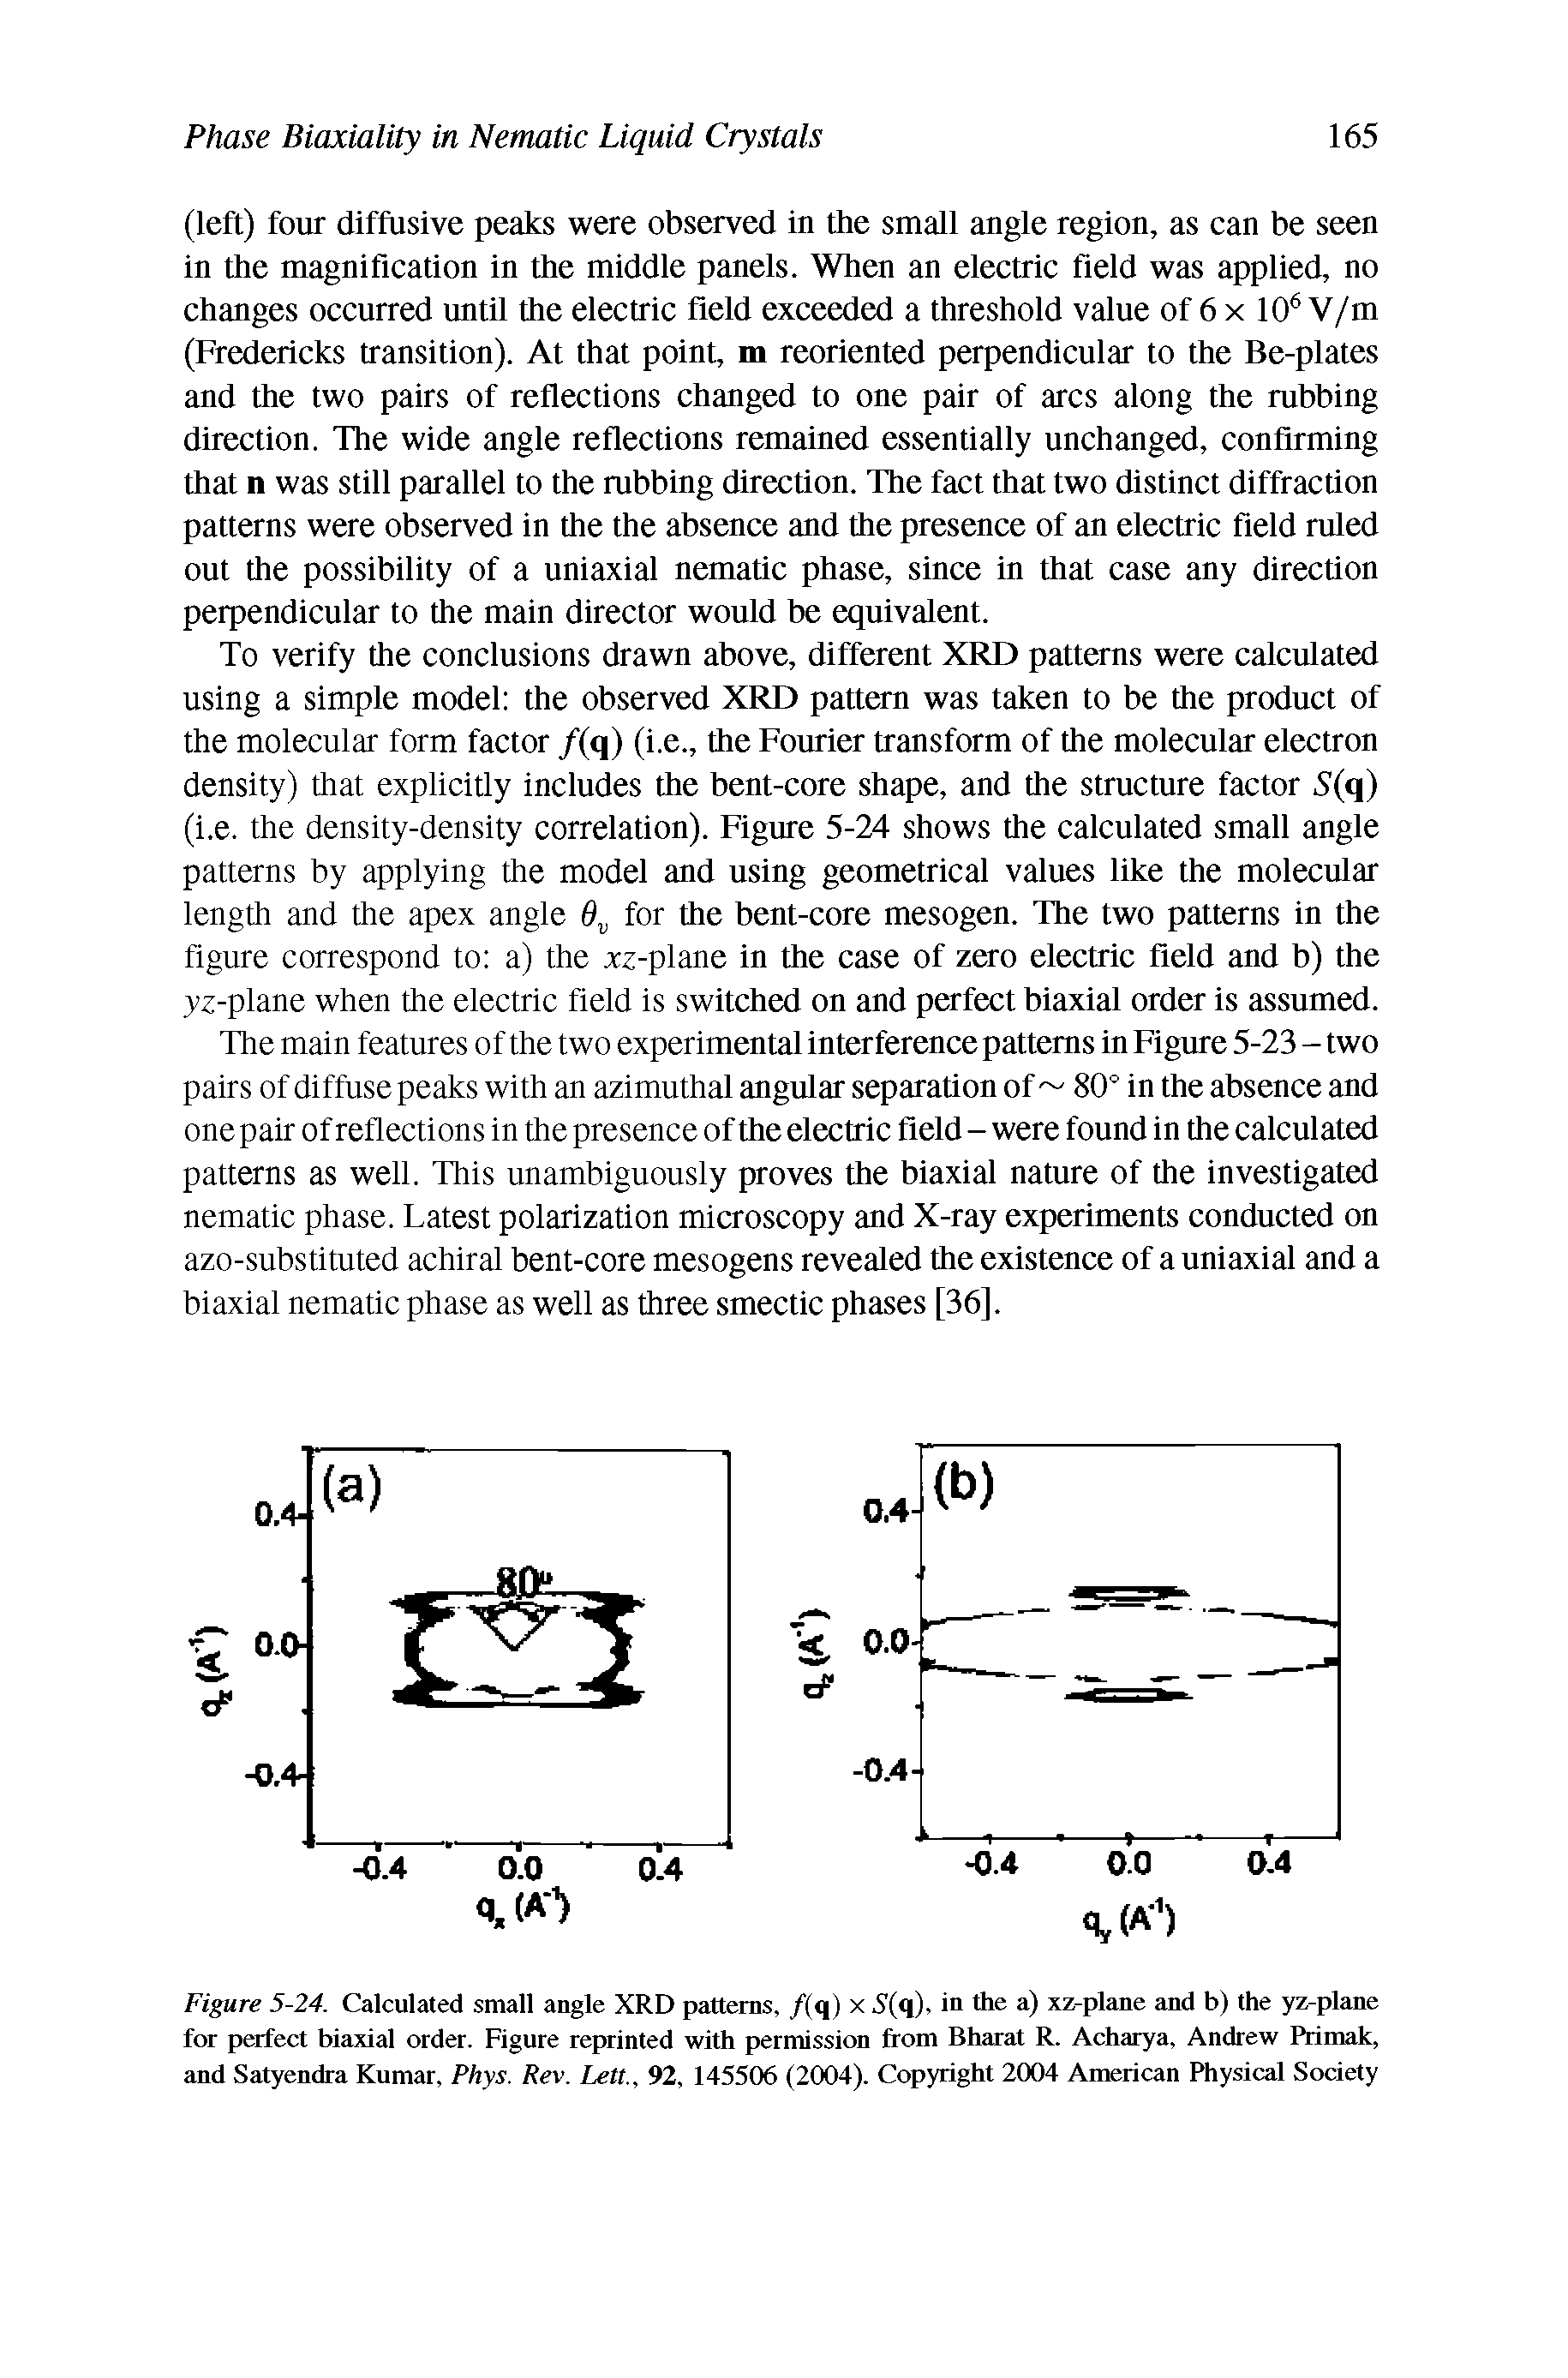 Figure 5-24. Calculated small angle XRD patterns, /(q) x 5 (q), in the a) xz-plane and b) the yz-plane for perfect biaxial order. Figure reprinted with permission from Bharat R. Acharya, Andrew Primak, and Satyendra Kumar, Phys. Rev. Lett., 92, 145506 (2004). Copyright 2004 American Physical Society...